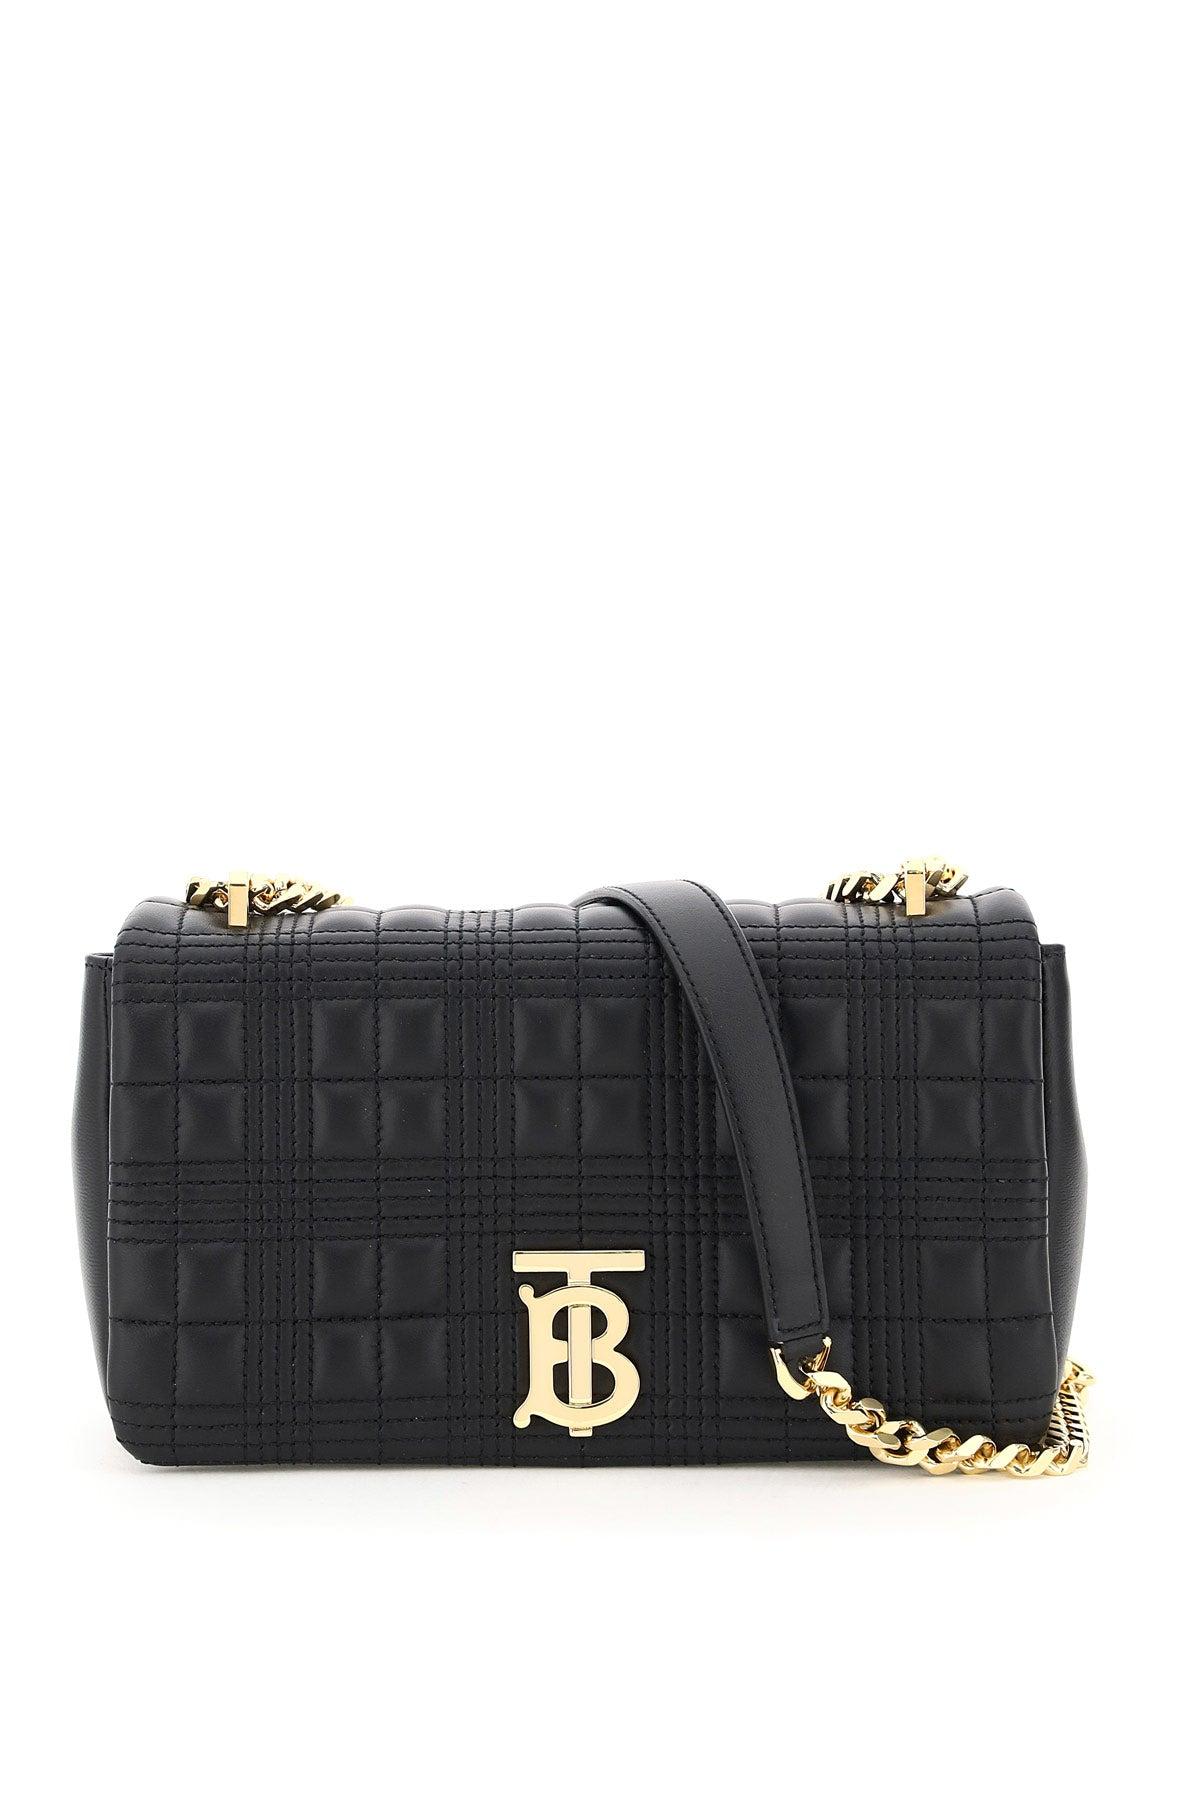 Burberry Small Quilted Lola Crossbody Bag